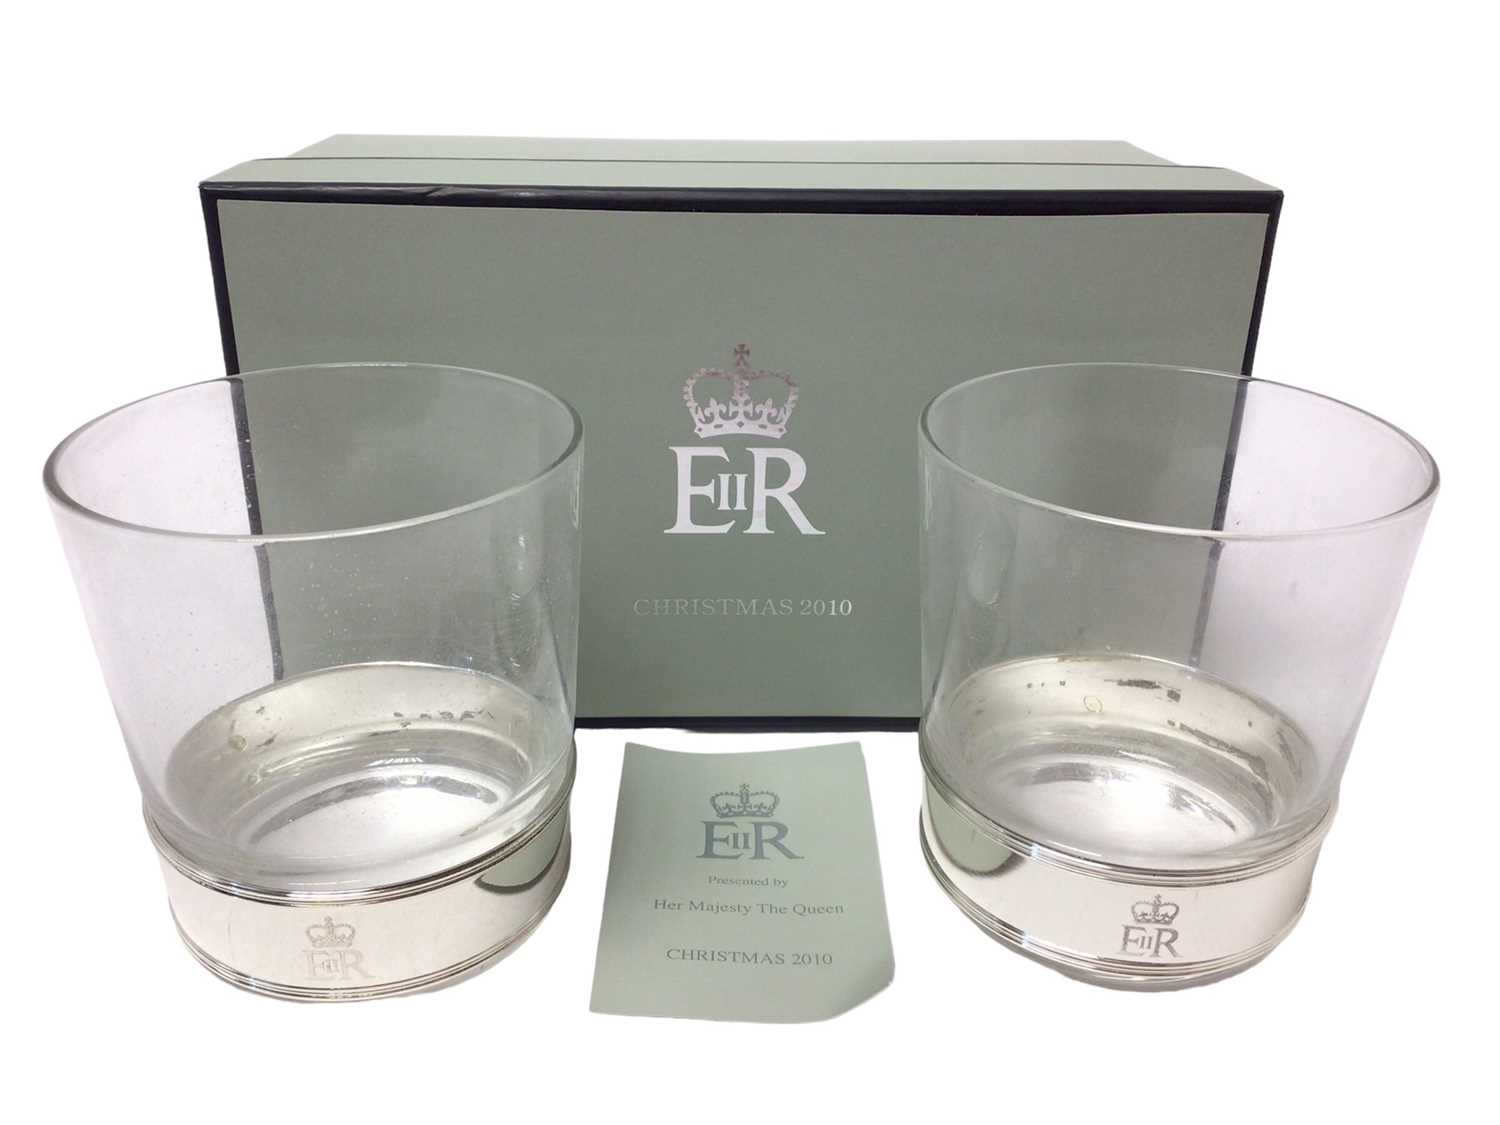 Lot 63 - H.M.Queen Elizabeth II, 2010 Royal Household Christmas present of pair glass beakers with silver plated collars engraved with the Royal cypher in original fitted box with card